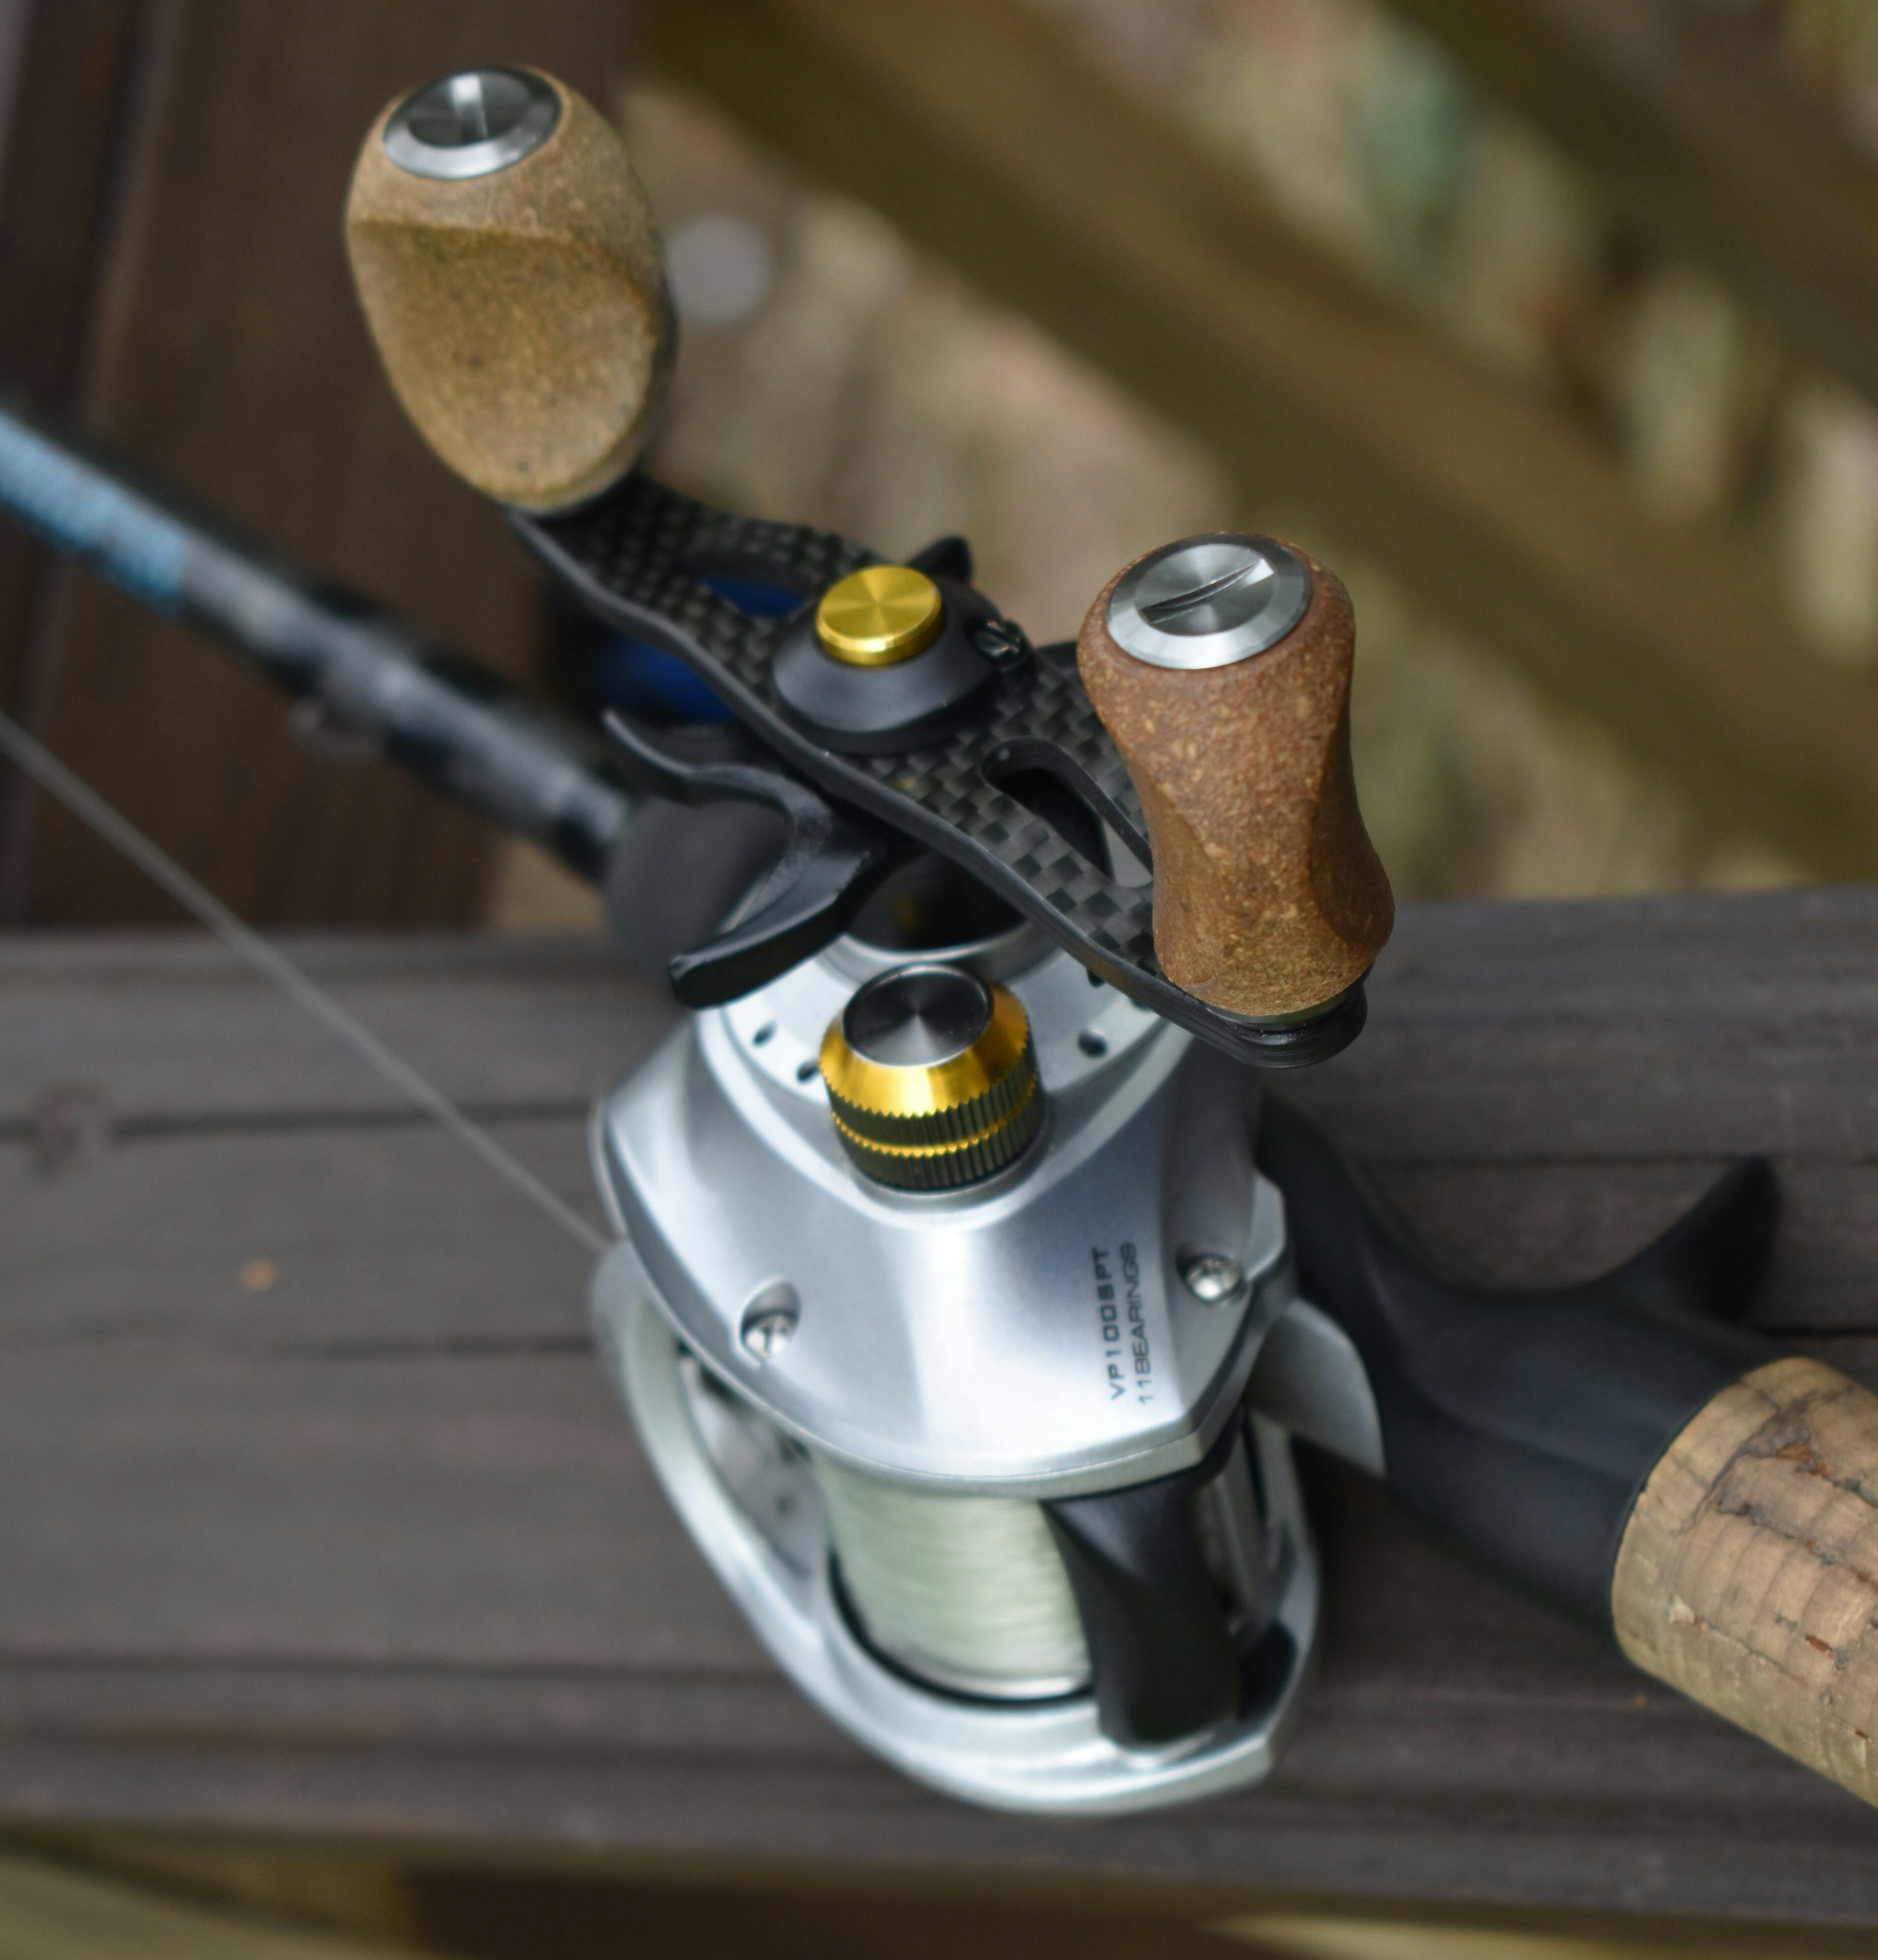 How to Spool a Baitcaster or Spinning Reel for Zero Fishing Line